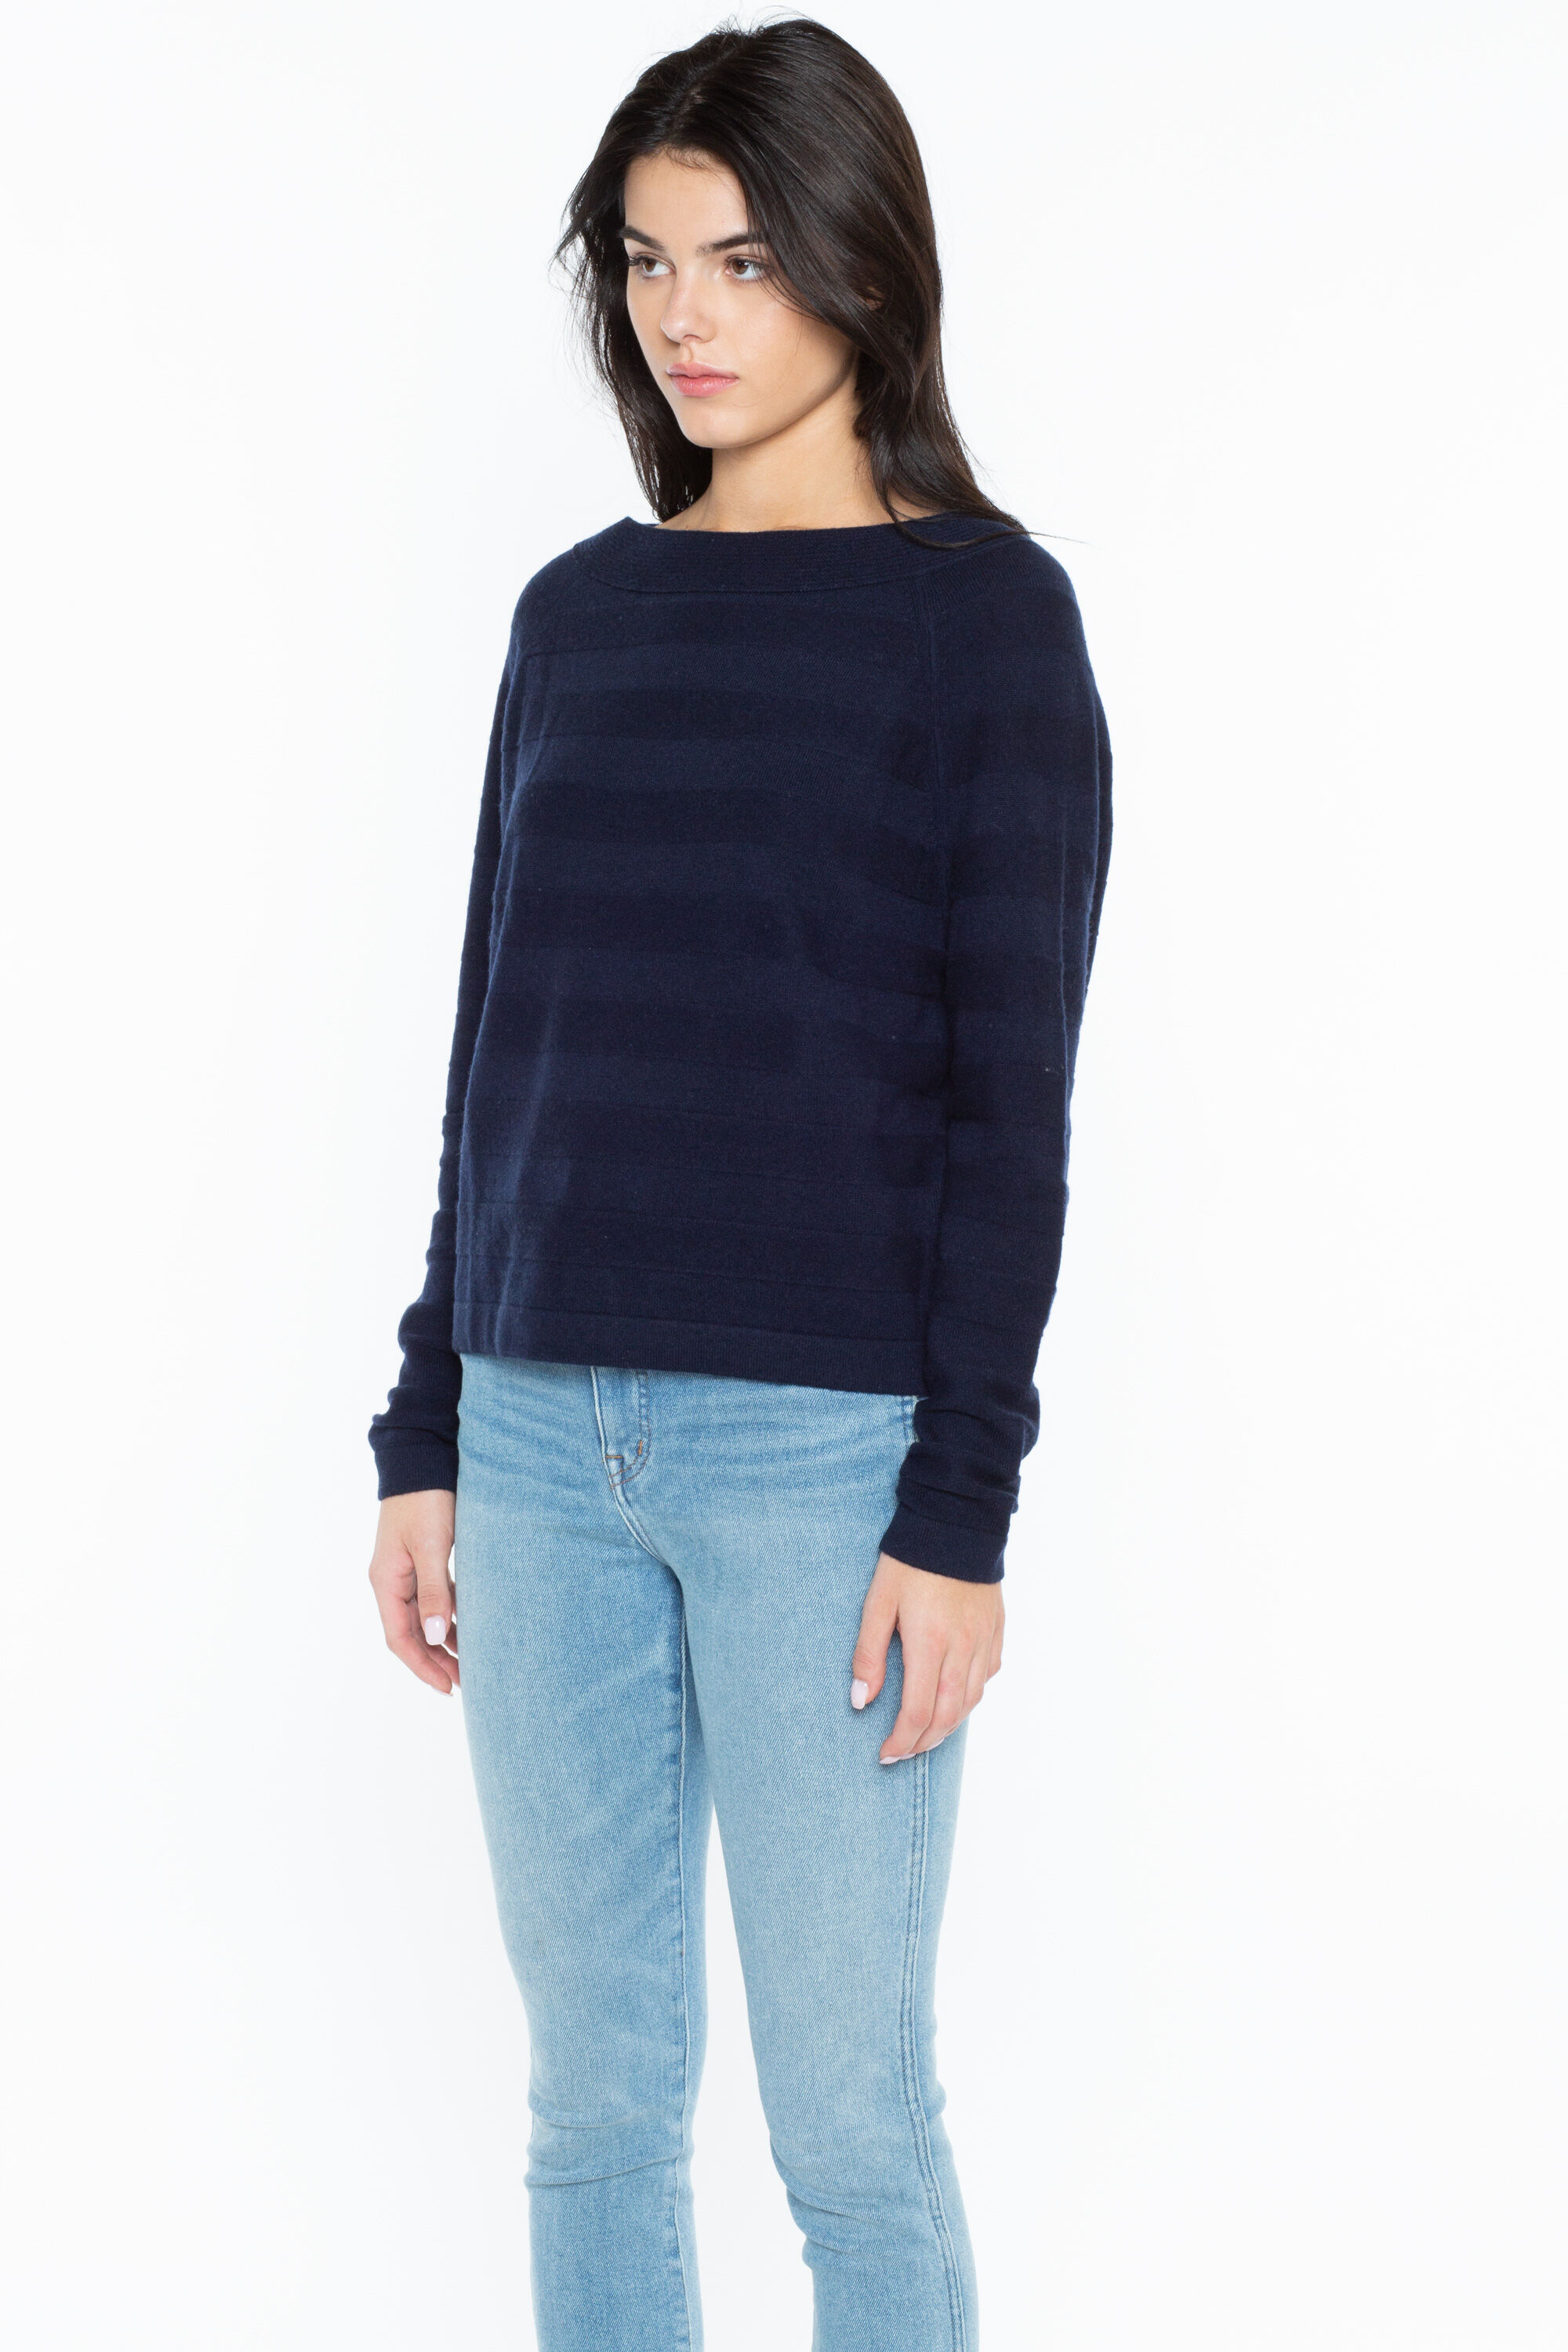 Pure Cashmere V Neck Sweater - Ocean Swell by Universal Standard